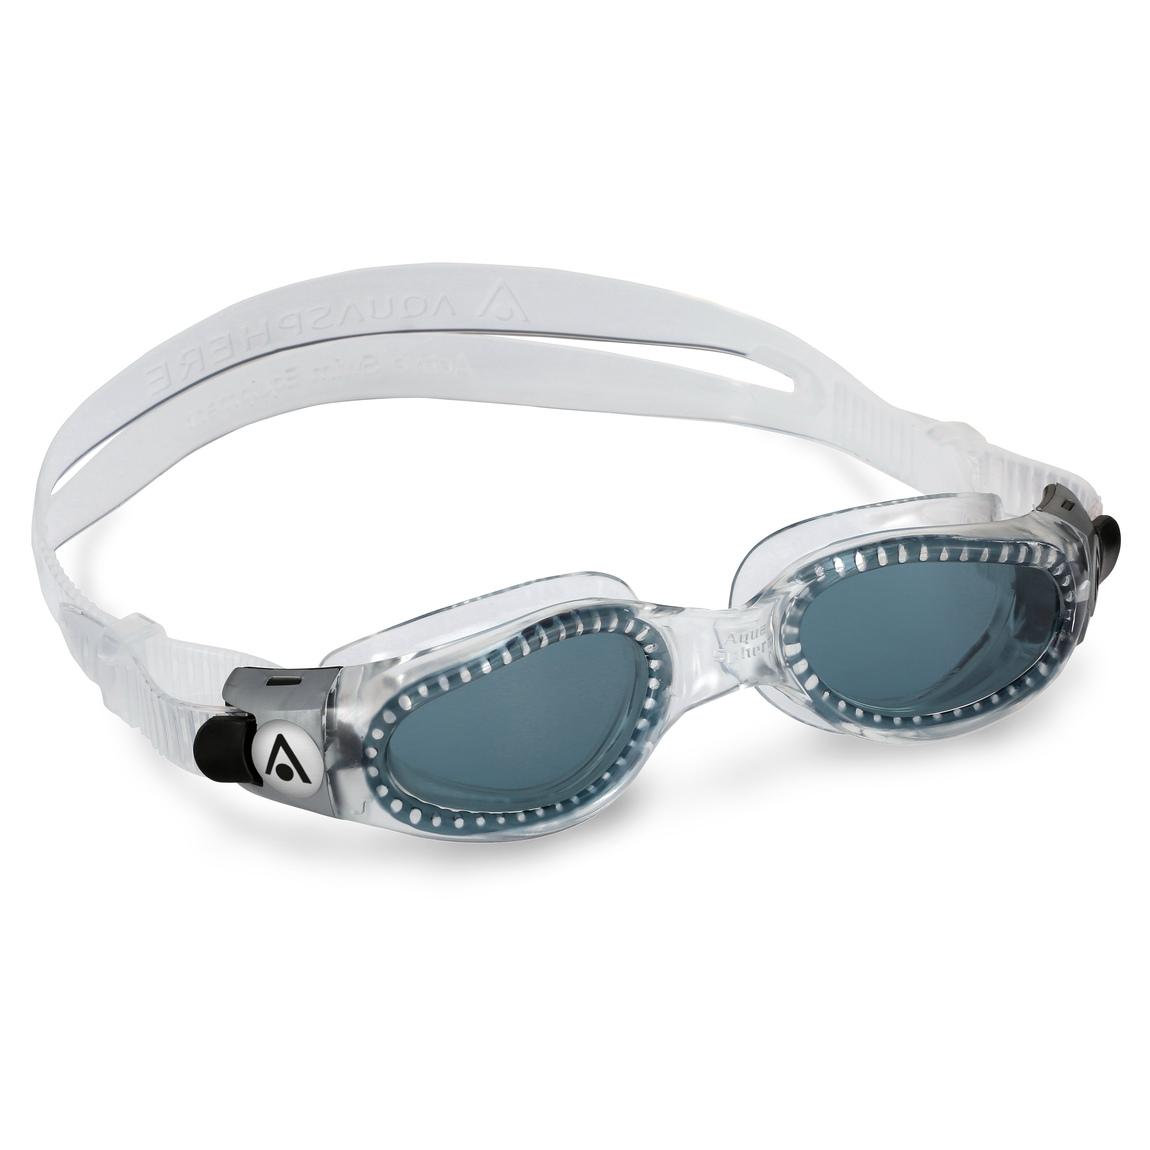 Aqua Sphere Kaiman Womens Goggles With Tinted Lens - Clear/black